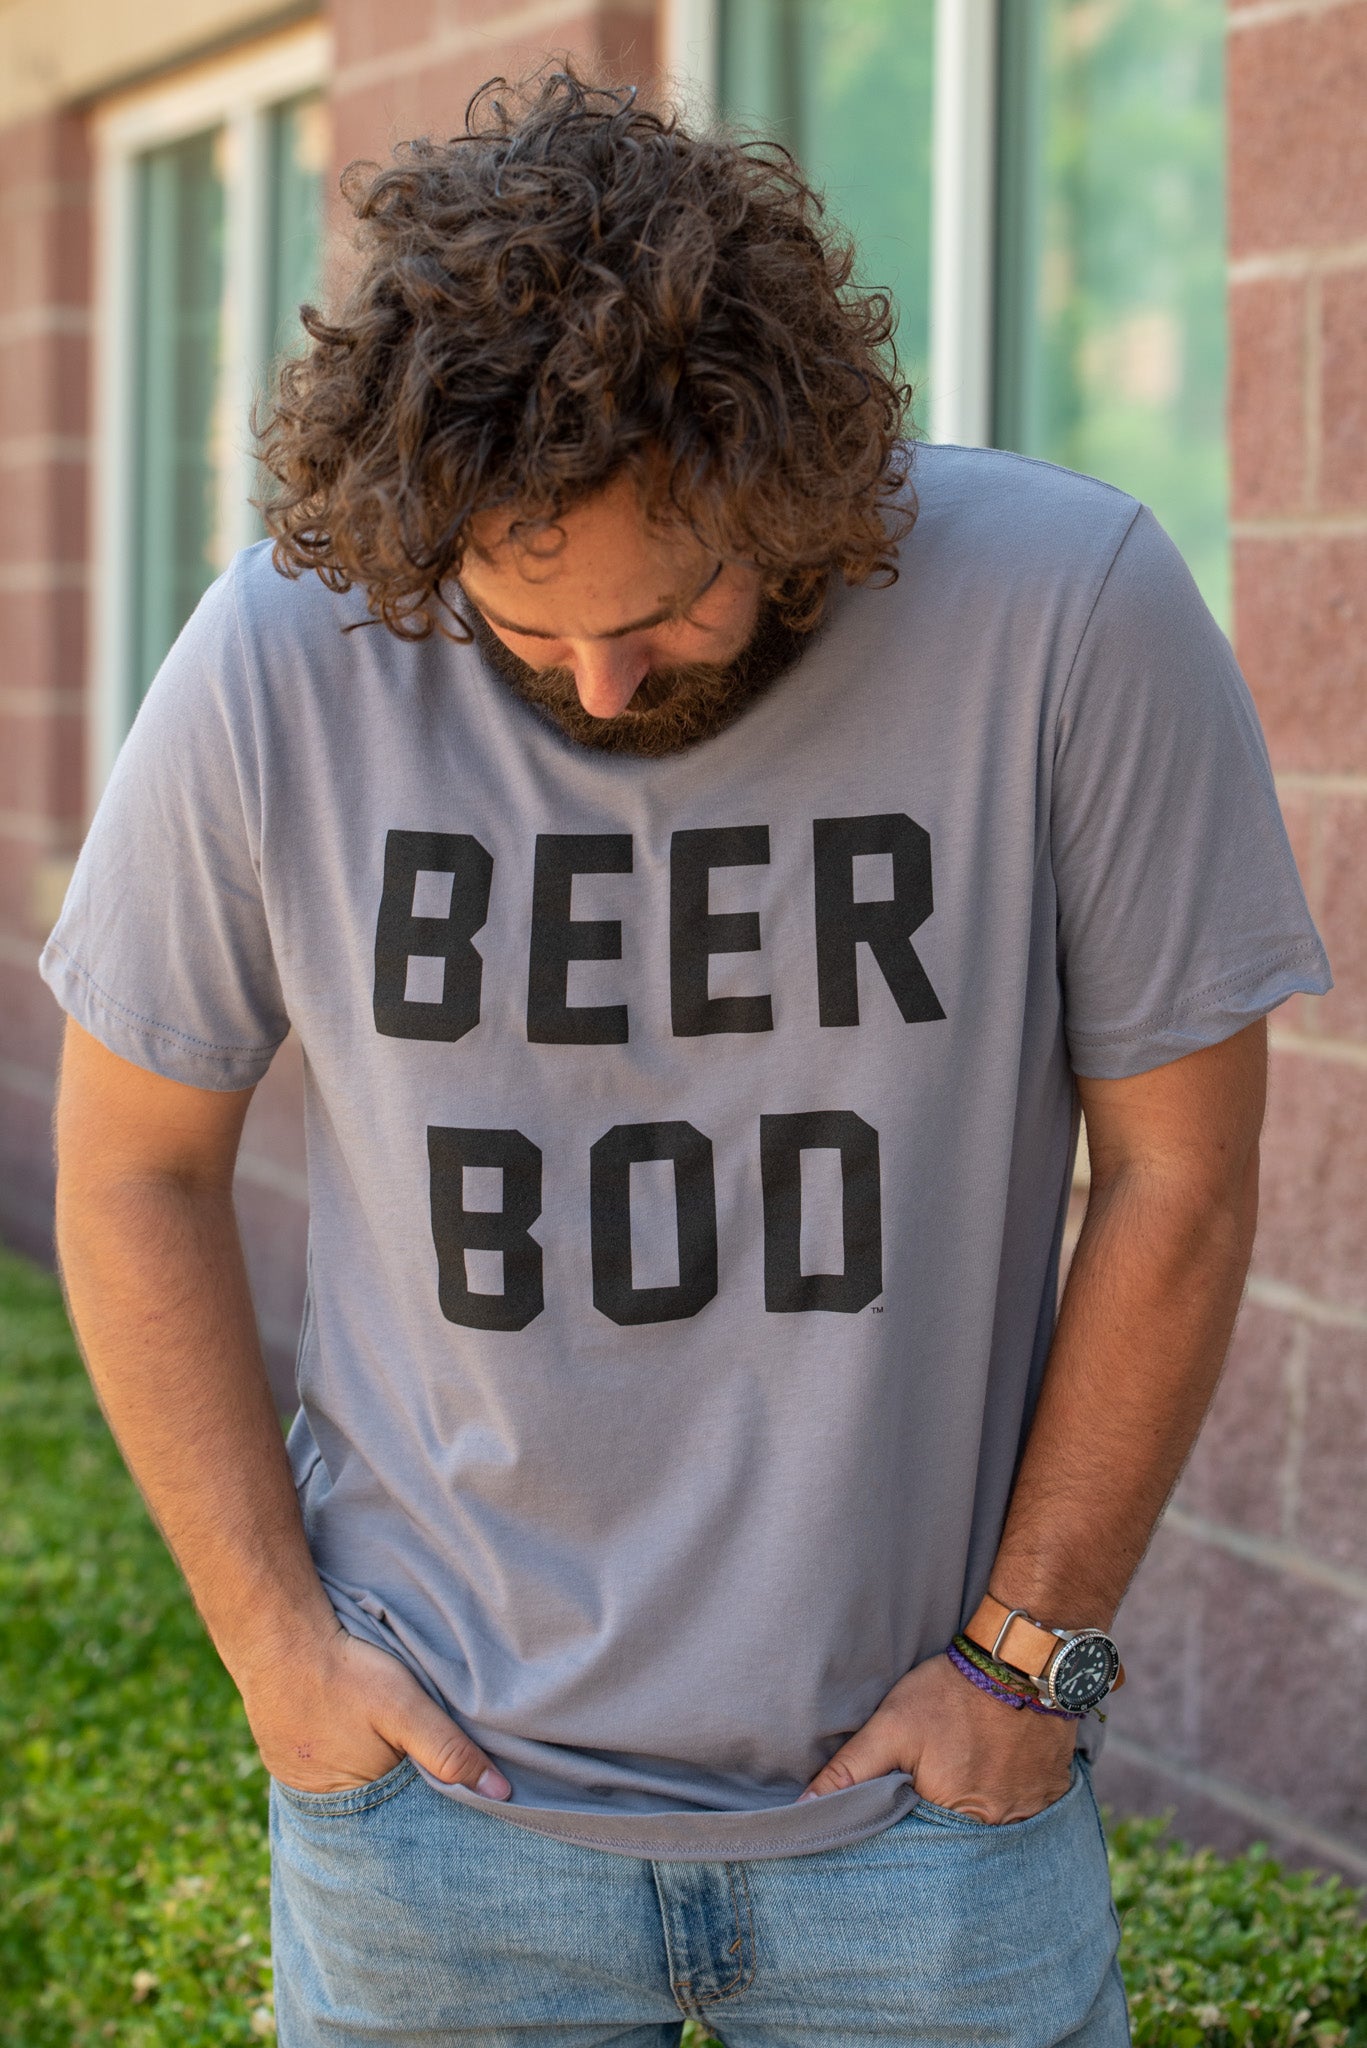 Beer Bod unisex short sleeve t-shirt storm grey - Stylish T-shirts - Trendy Dad Inspired T-Shirts at Lush Fashion Lounge Boutique in Oklahoma City